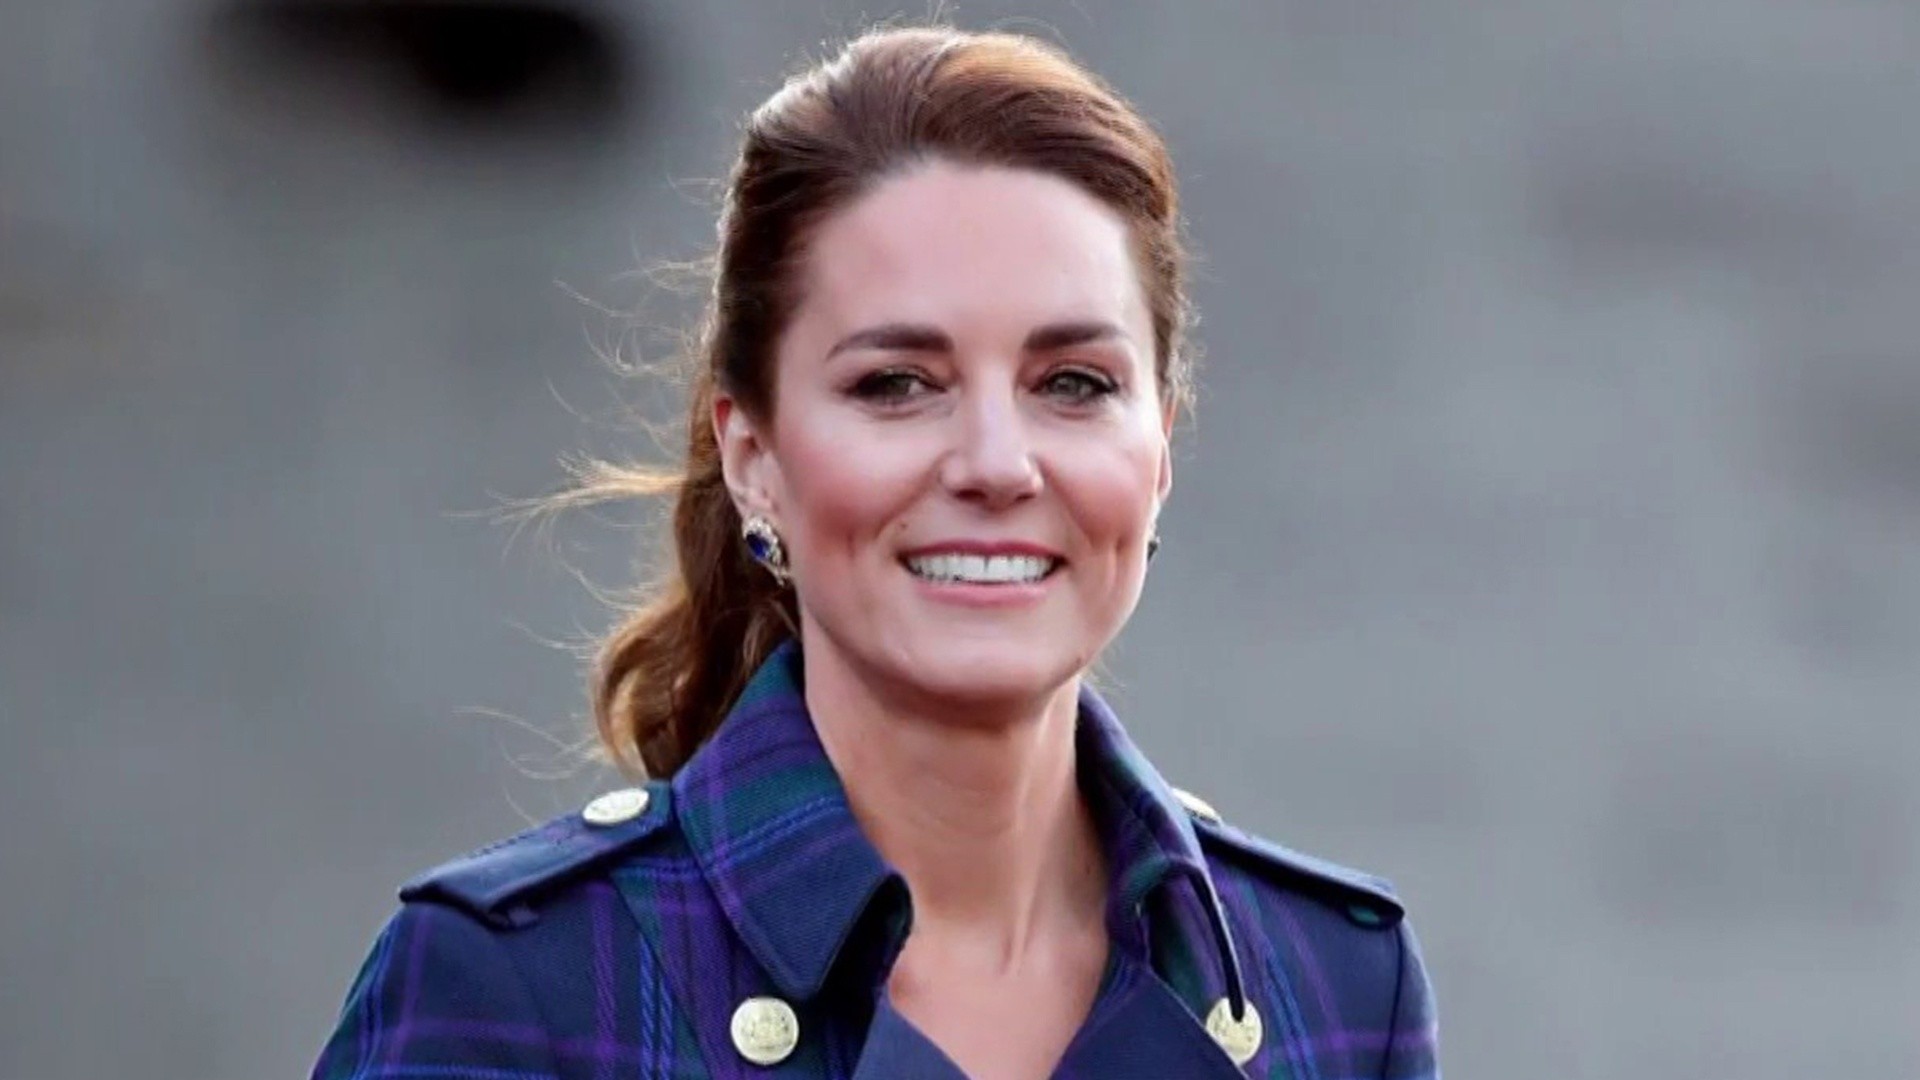 Kate Middleton self-isolating after possible exposure to COVID-19